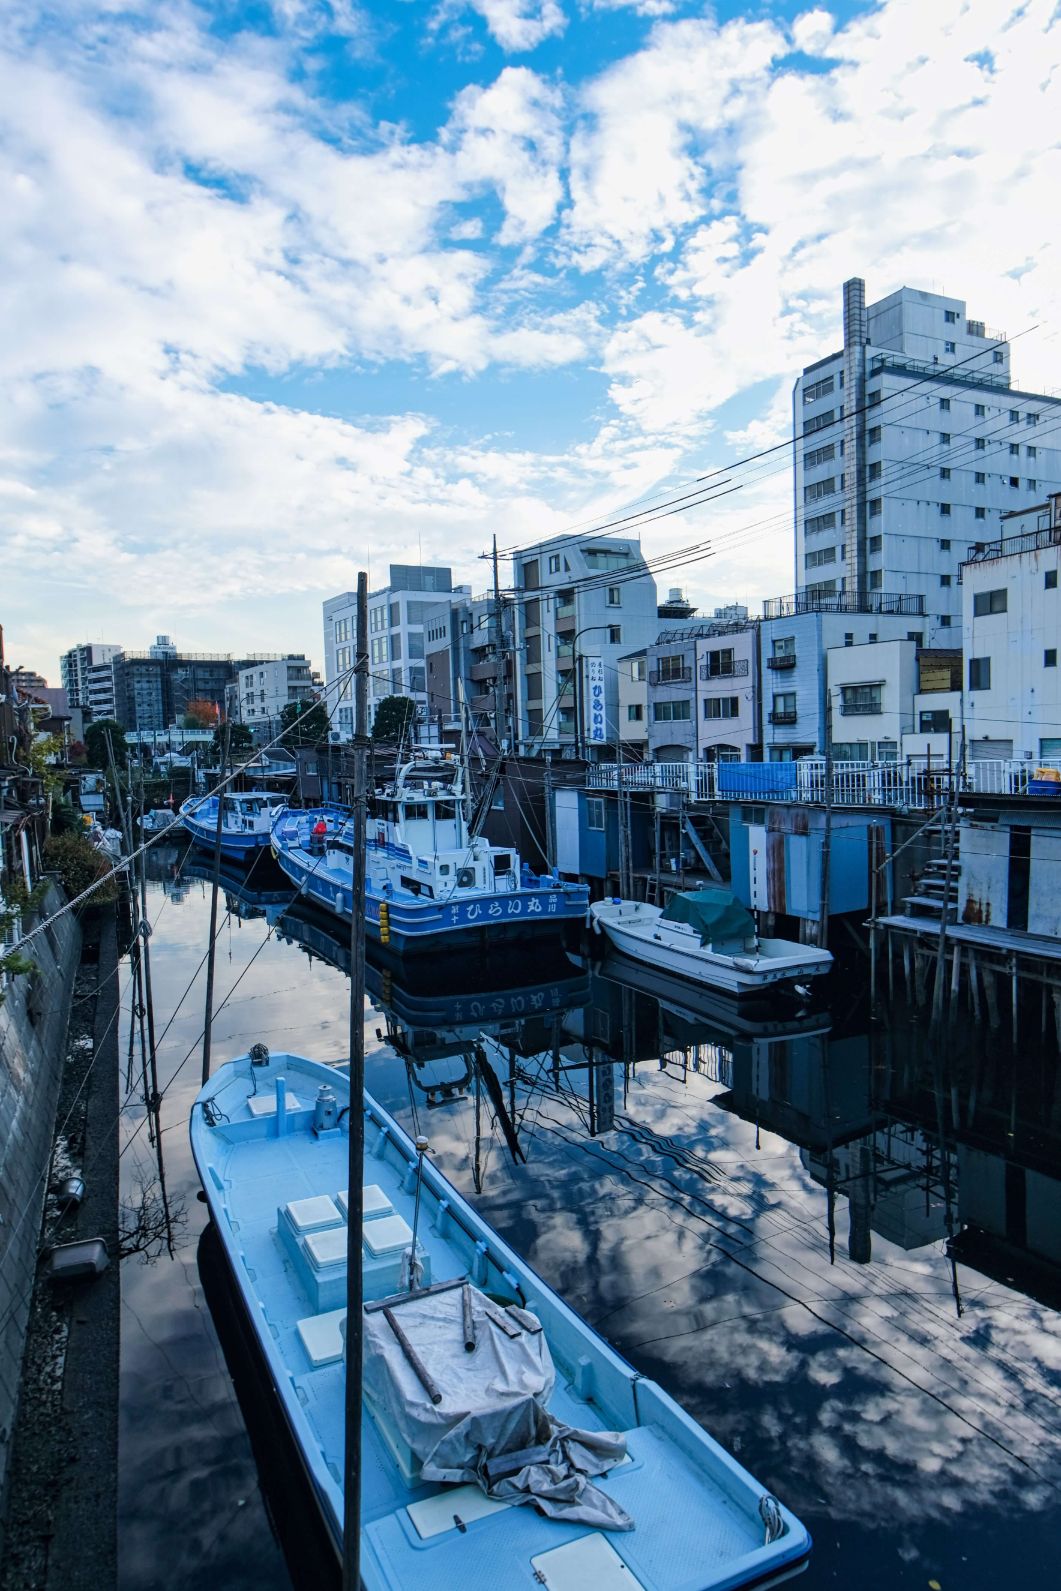 This area was an thriving harbor during the Edo period and has a long history. It is a unique sight not found in any other parts of Tokyo.